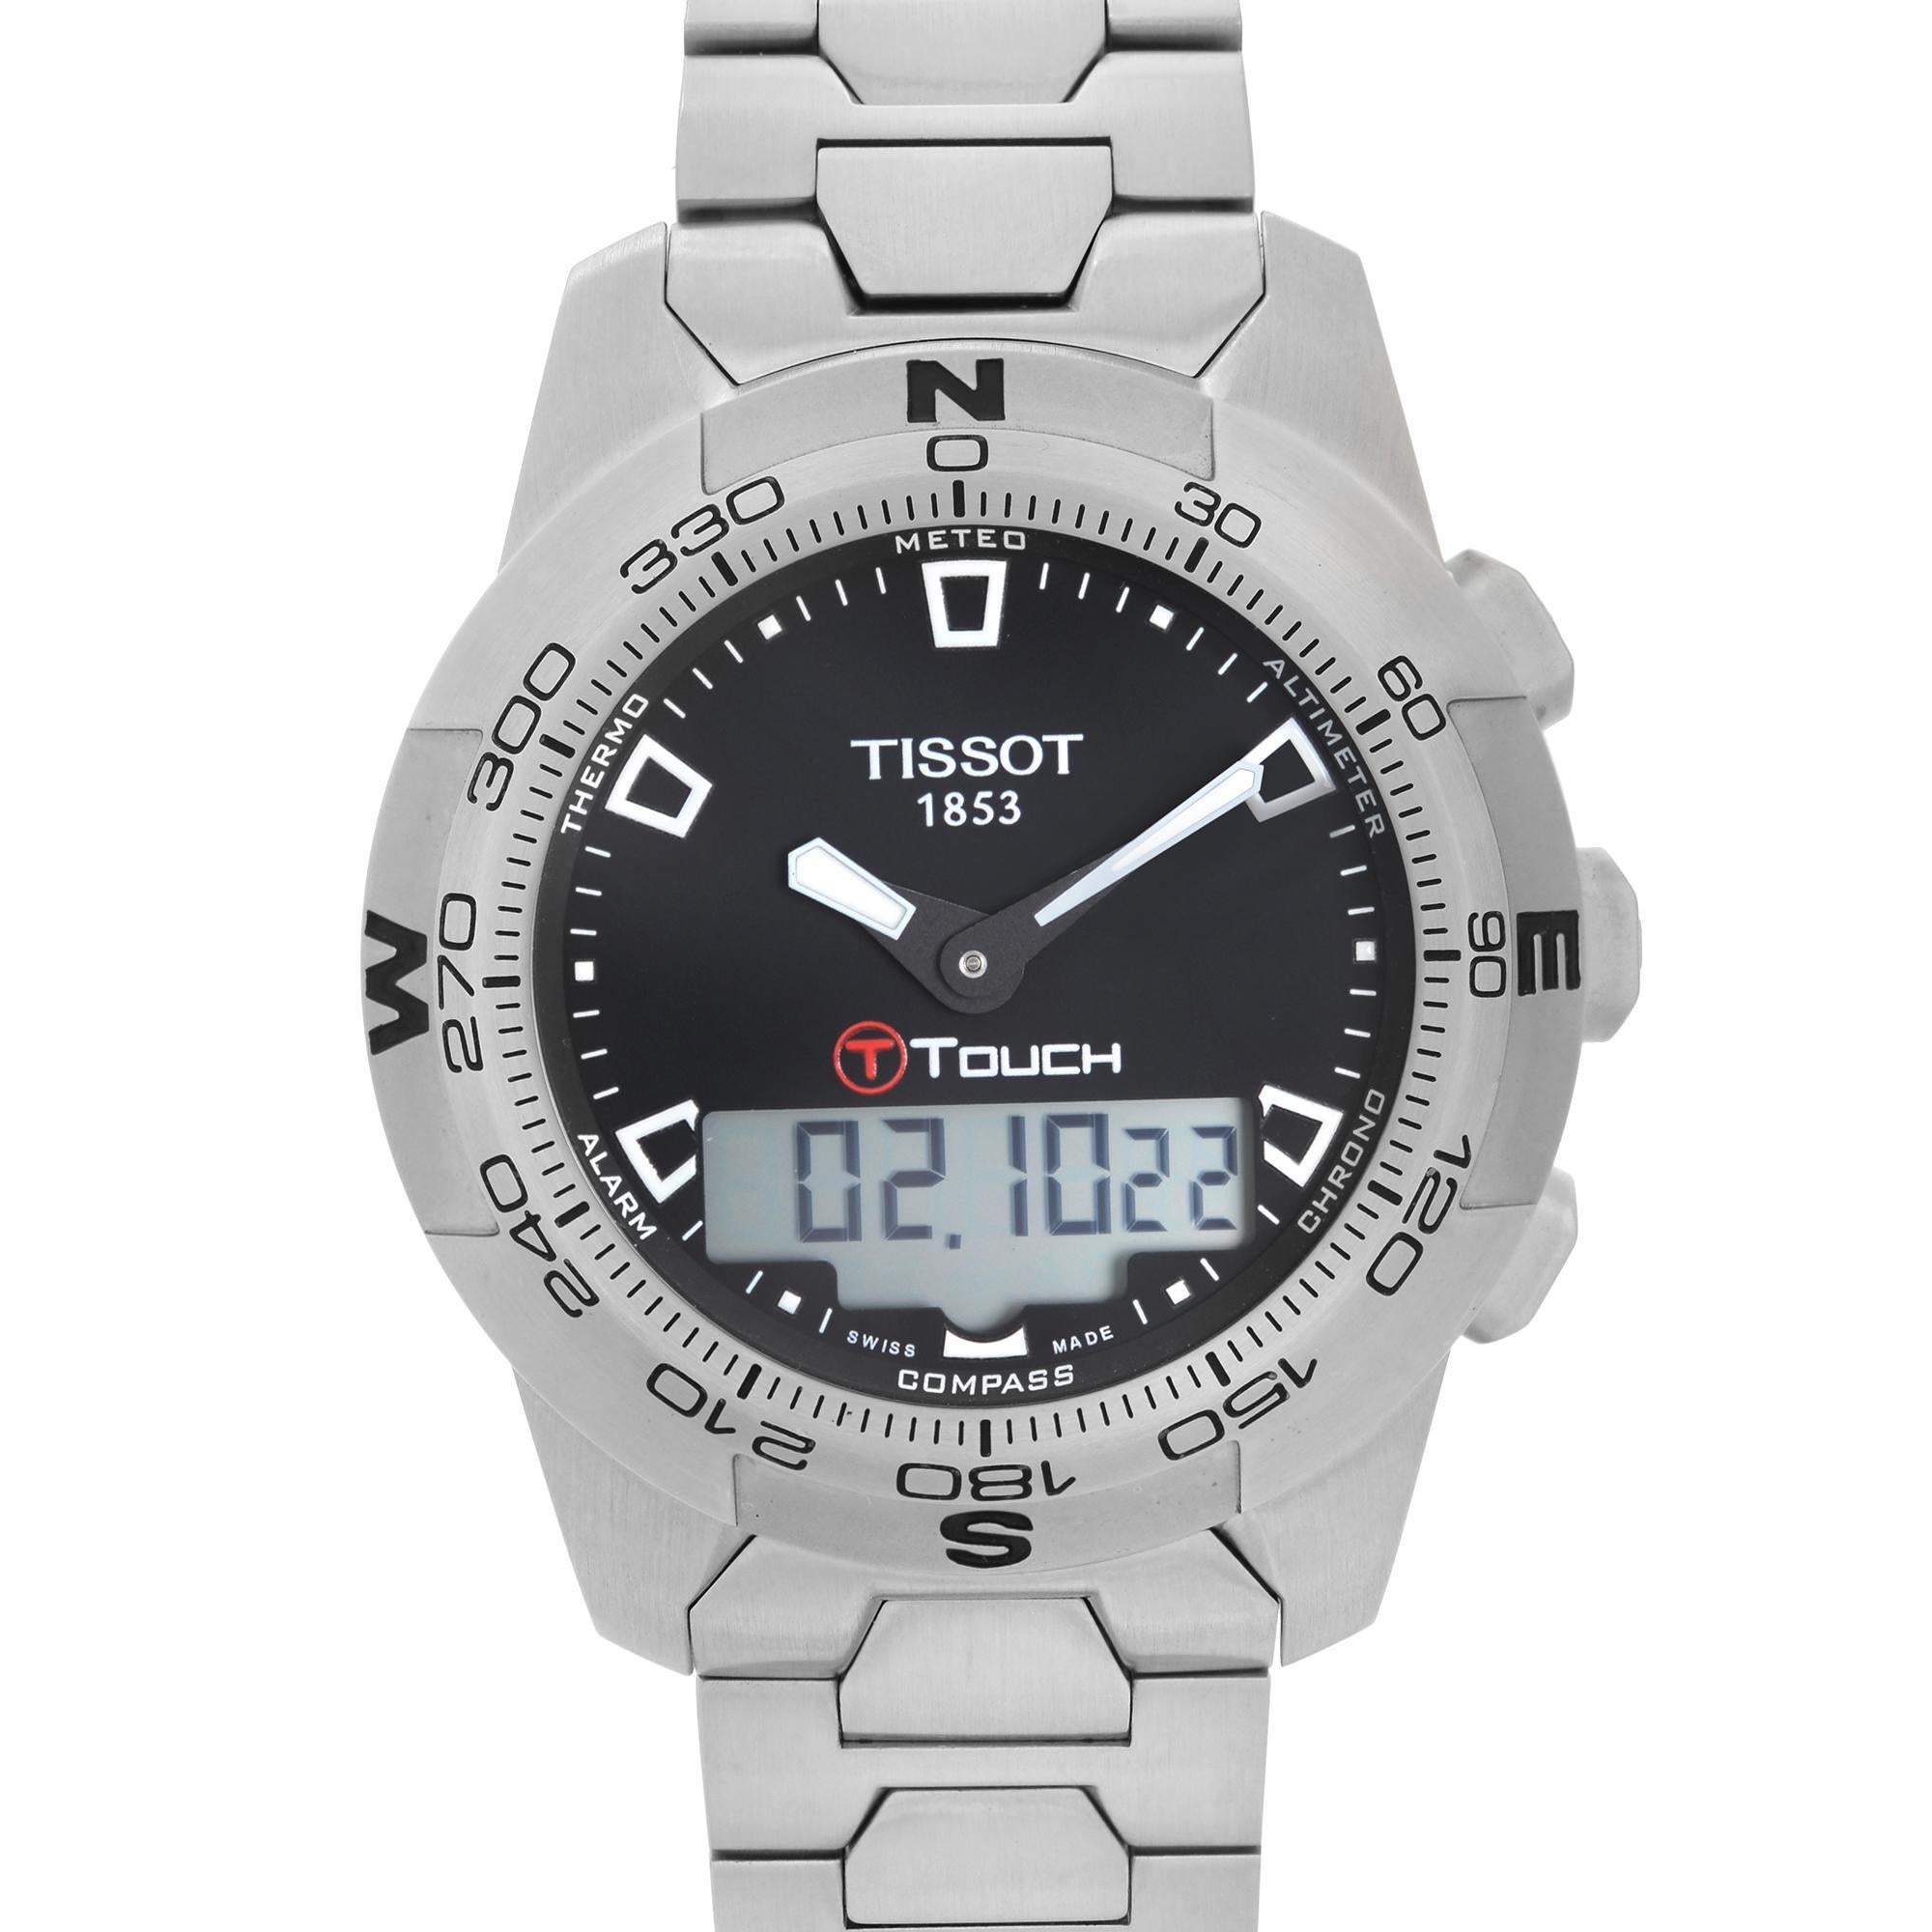 Display Model Tissot T-Touch II 43mm Steel Digital Dial Mens Quartz Watch T047.420.11.051.00. This Timepiece is Powered by Quartz (battery) Movement with Features: Stainless Steel Case with a Stainless Steel Bracelet. Bidirectional Rotating